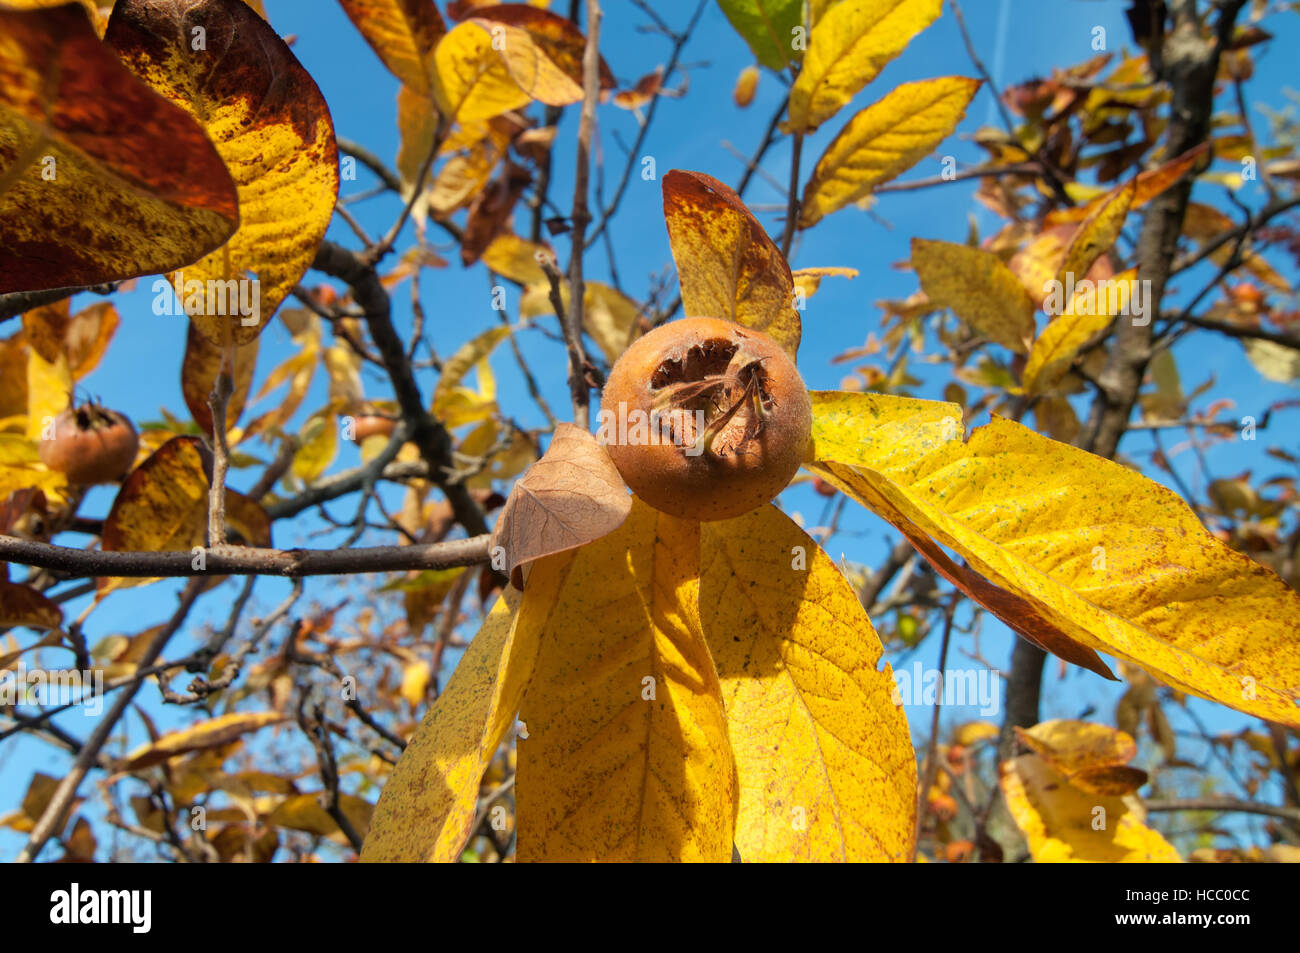 Ripe common medlar fruit with blue sky in the background Stock Photo